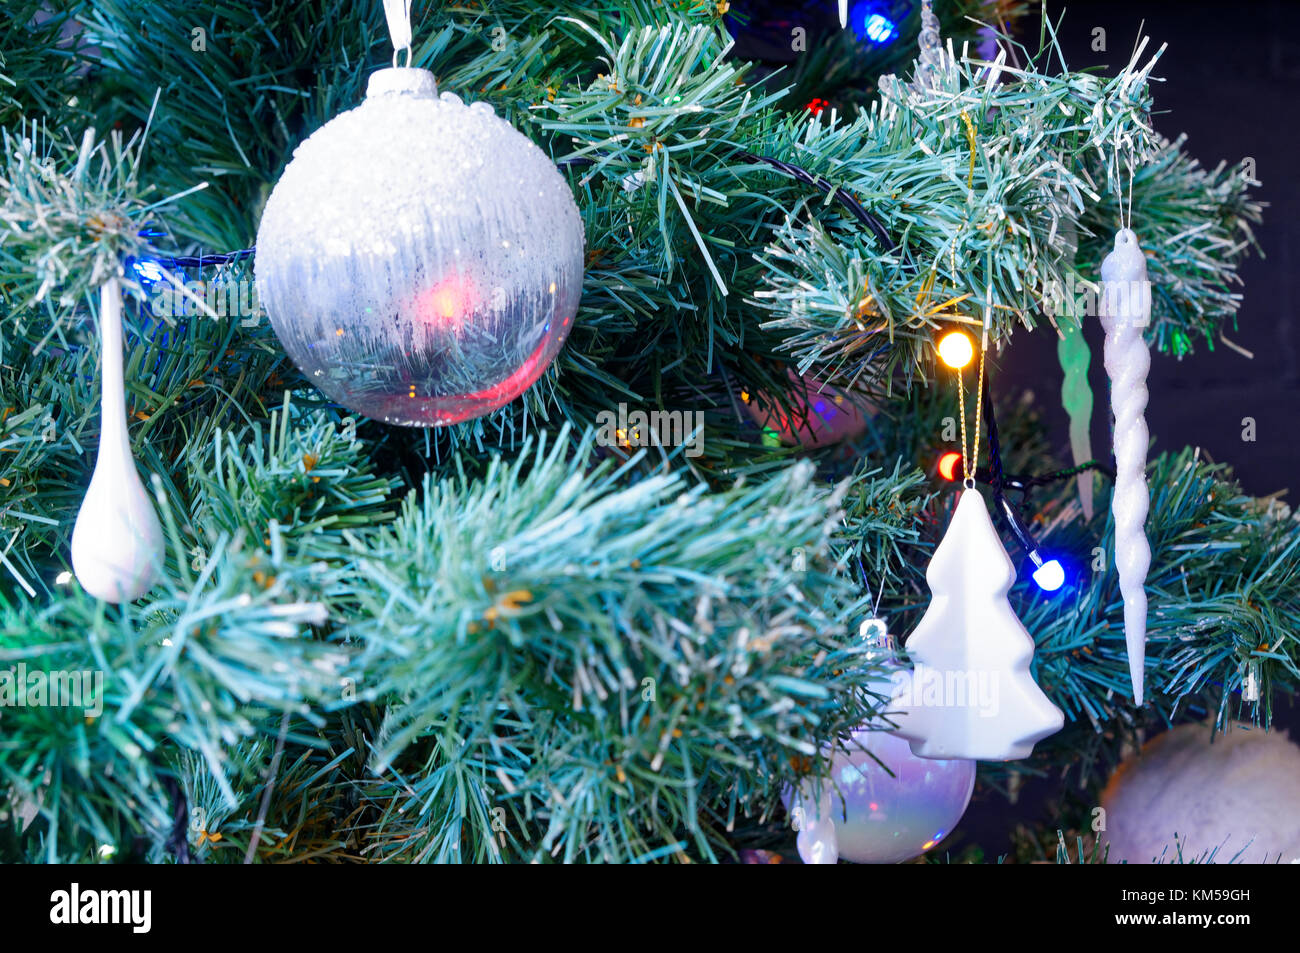 Closeup of white bauble and decoration on an xmas tree Stock Photo